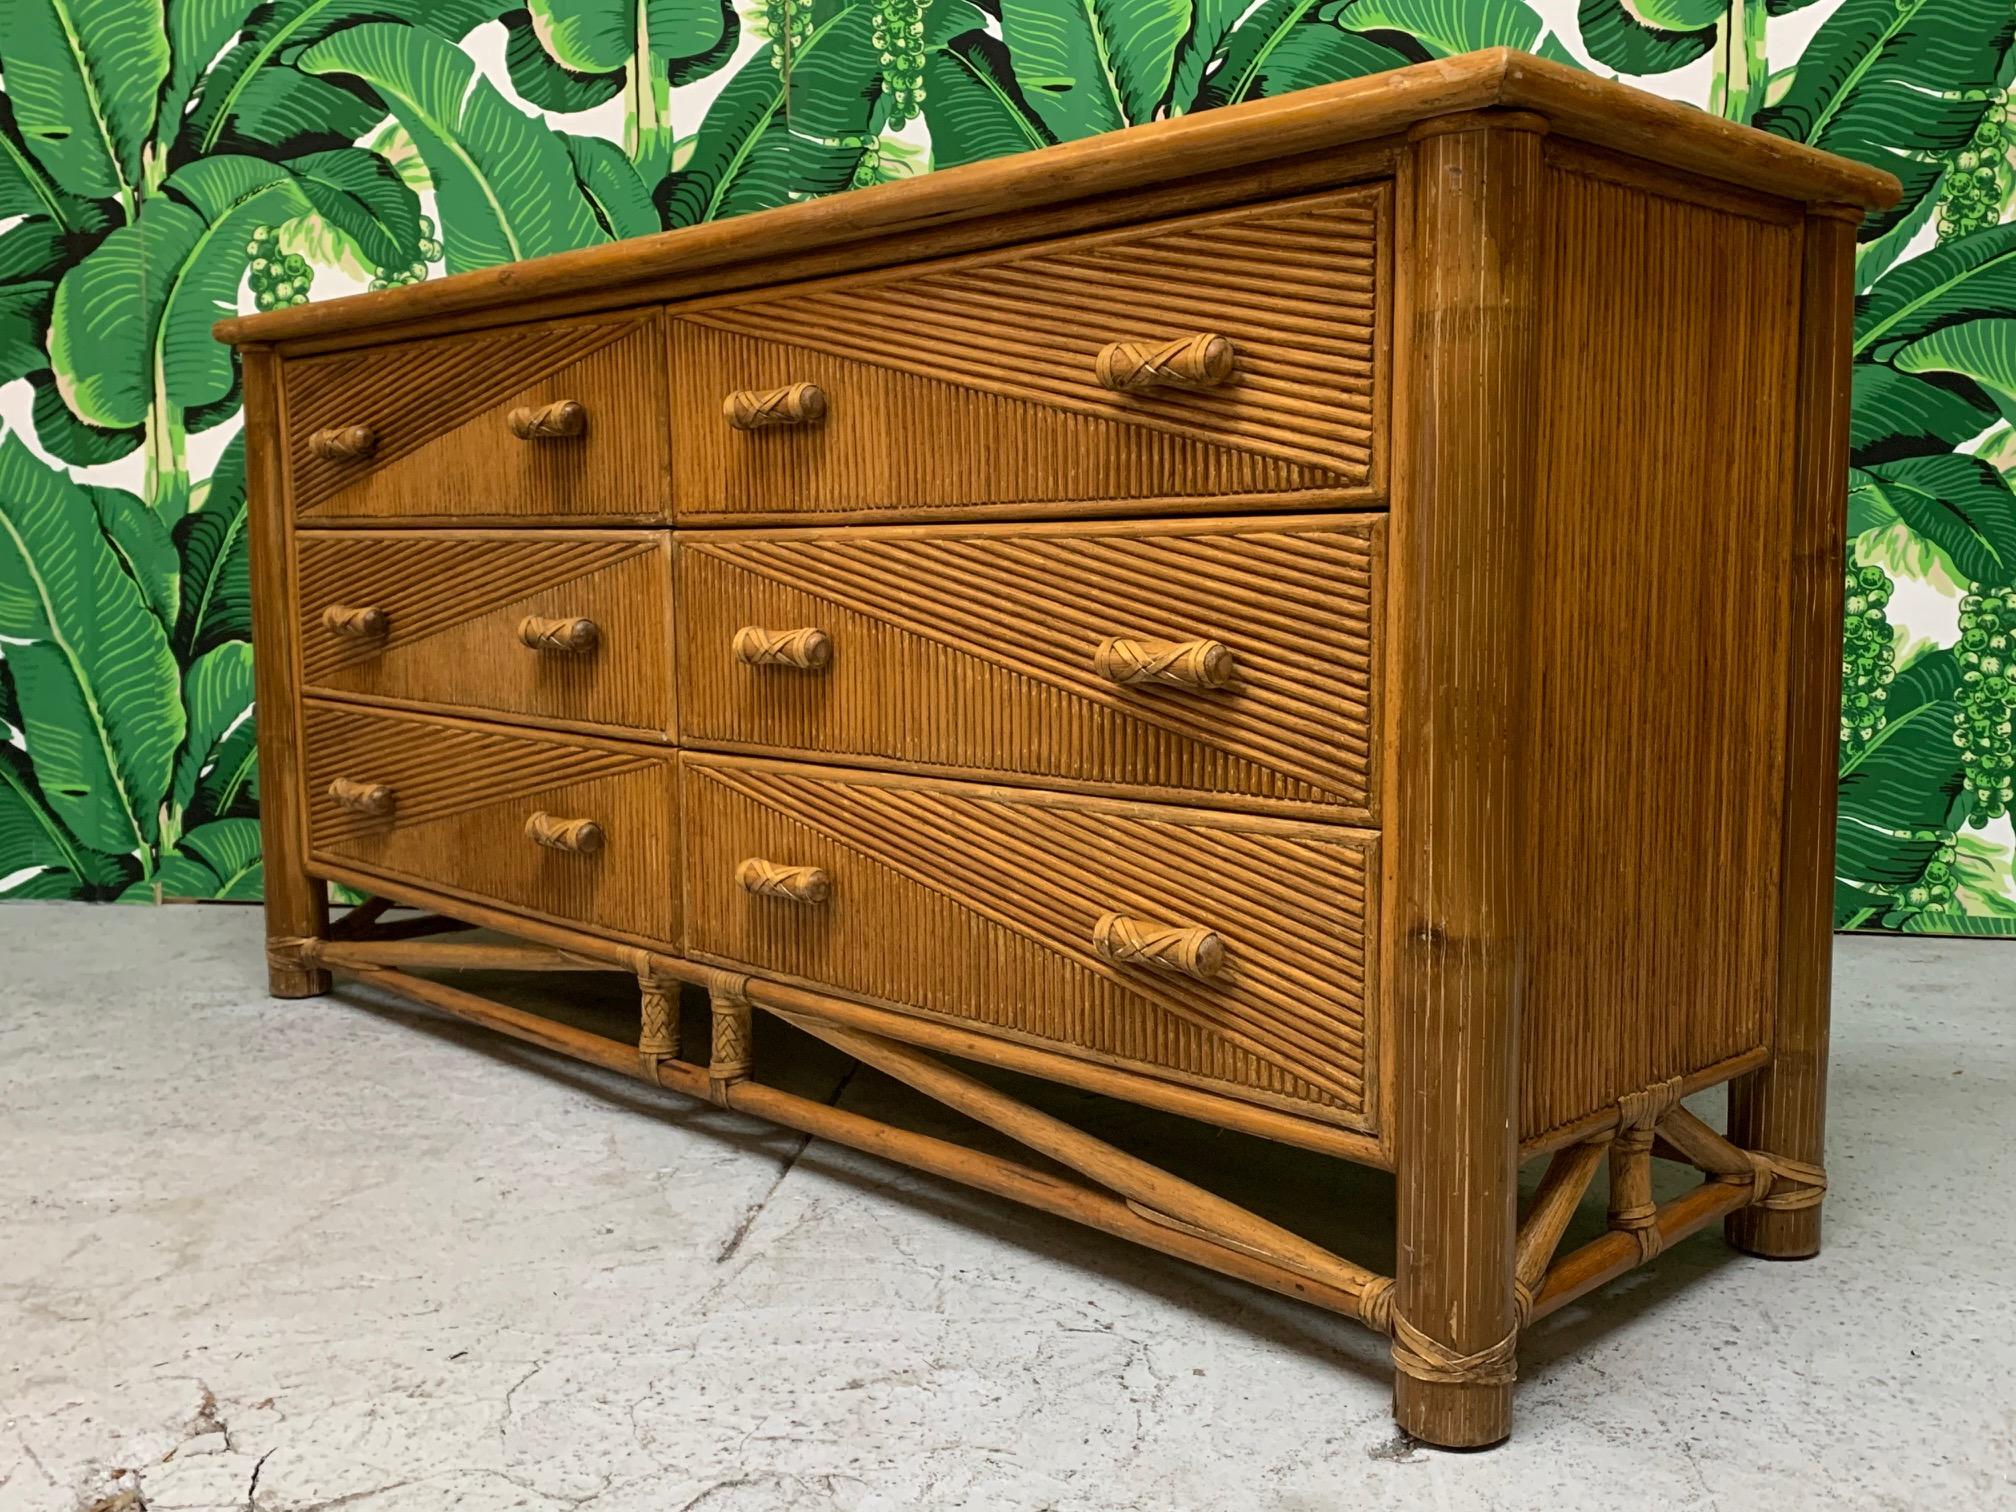 Rattan dresser in the manner of Gabriella Crespi features pencil reed veneered surfaces in a modern geometric design and heavy bamboo detailing. Very good condition with minor imperfections consistent with age.